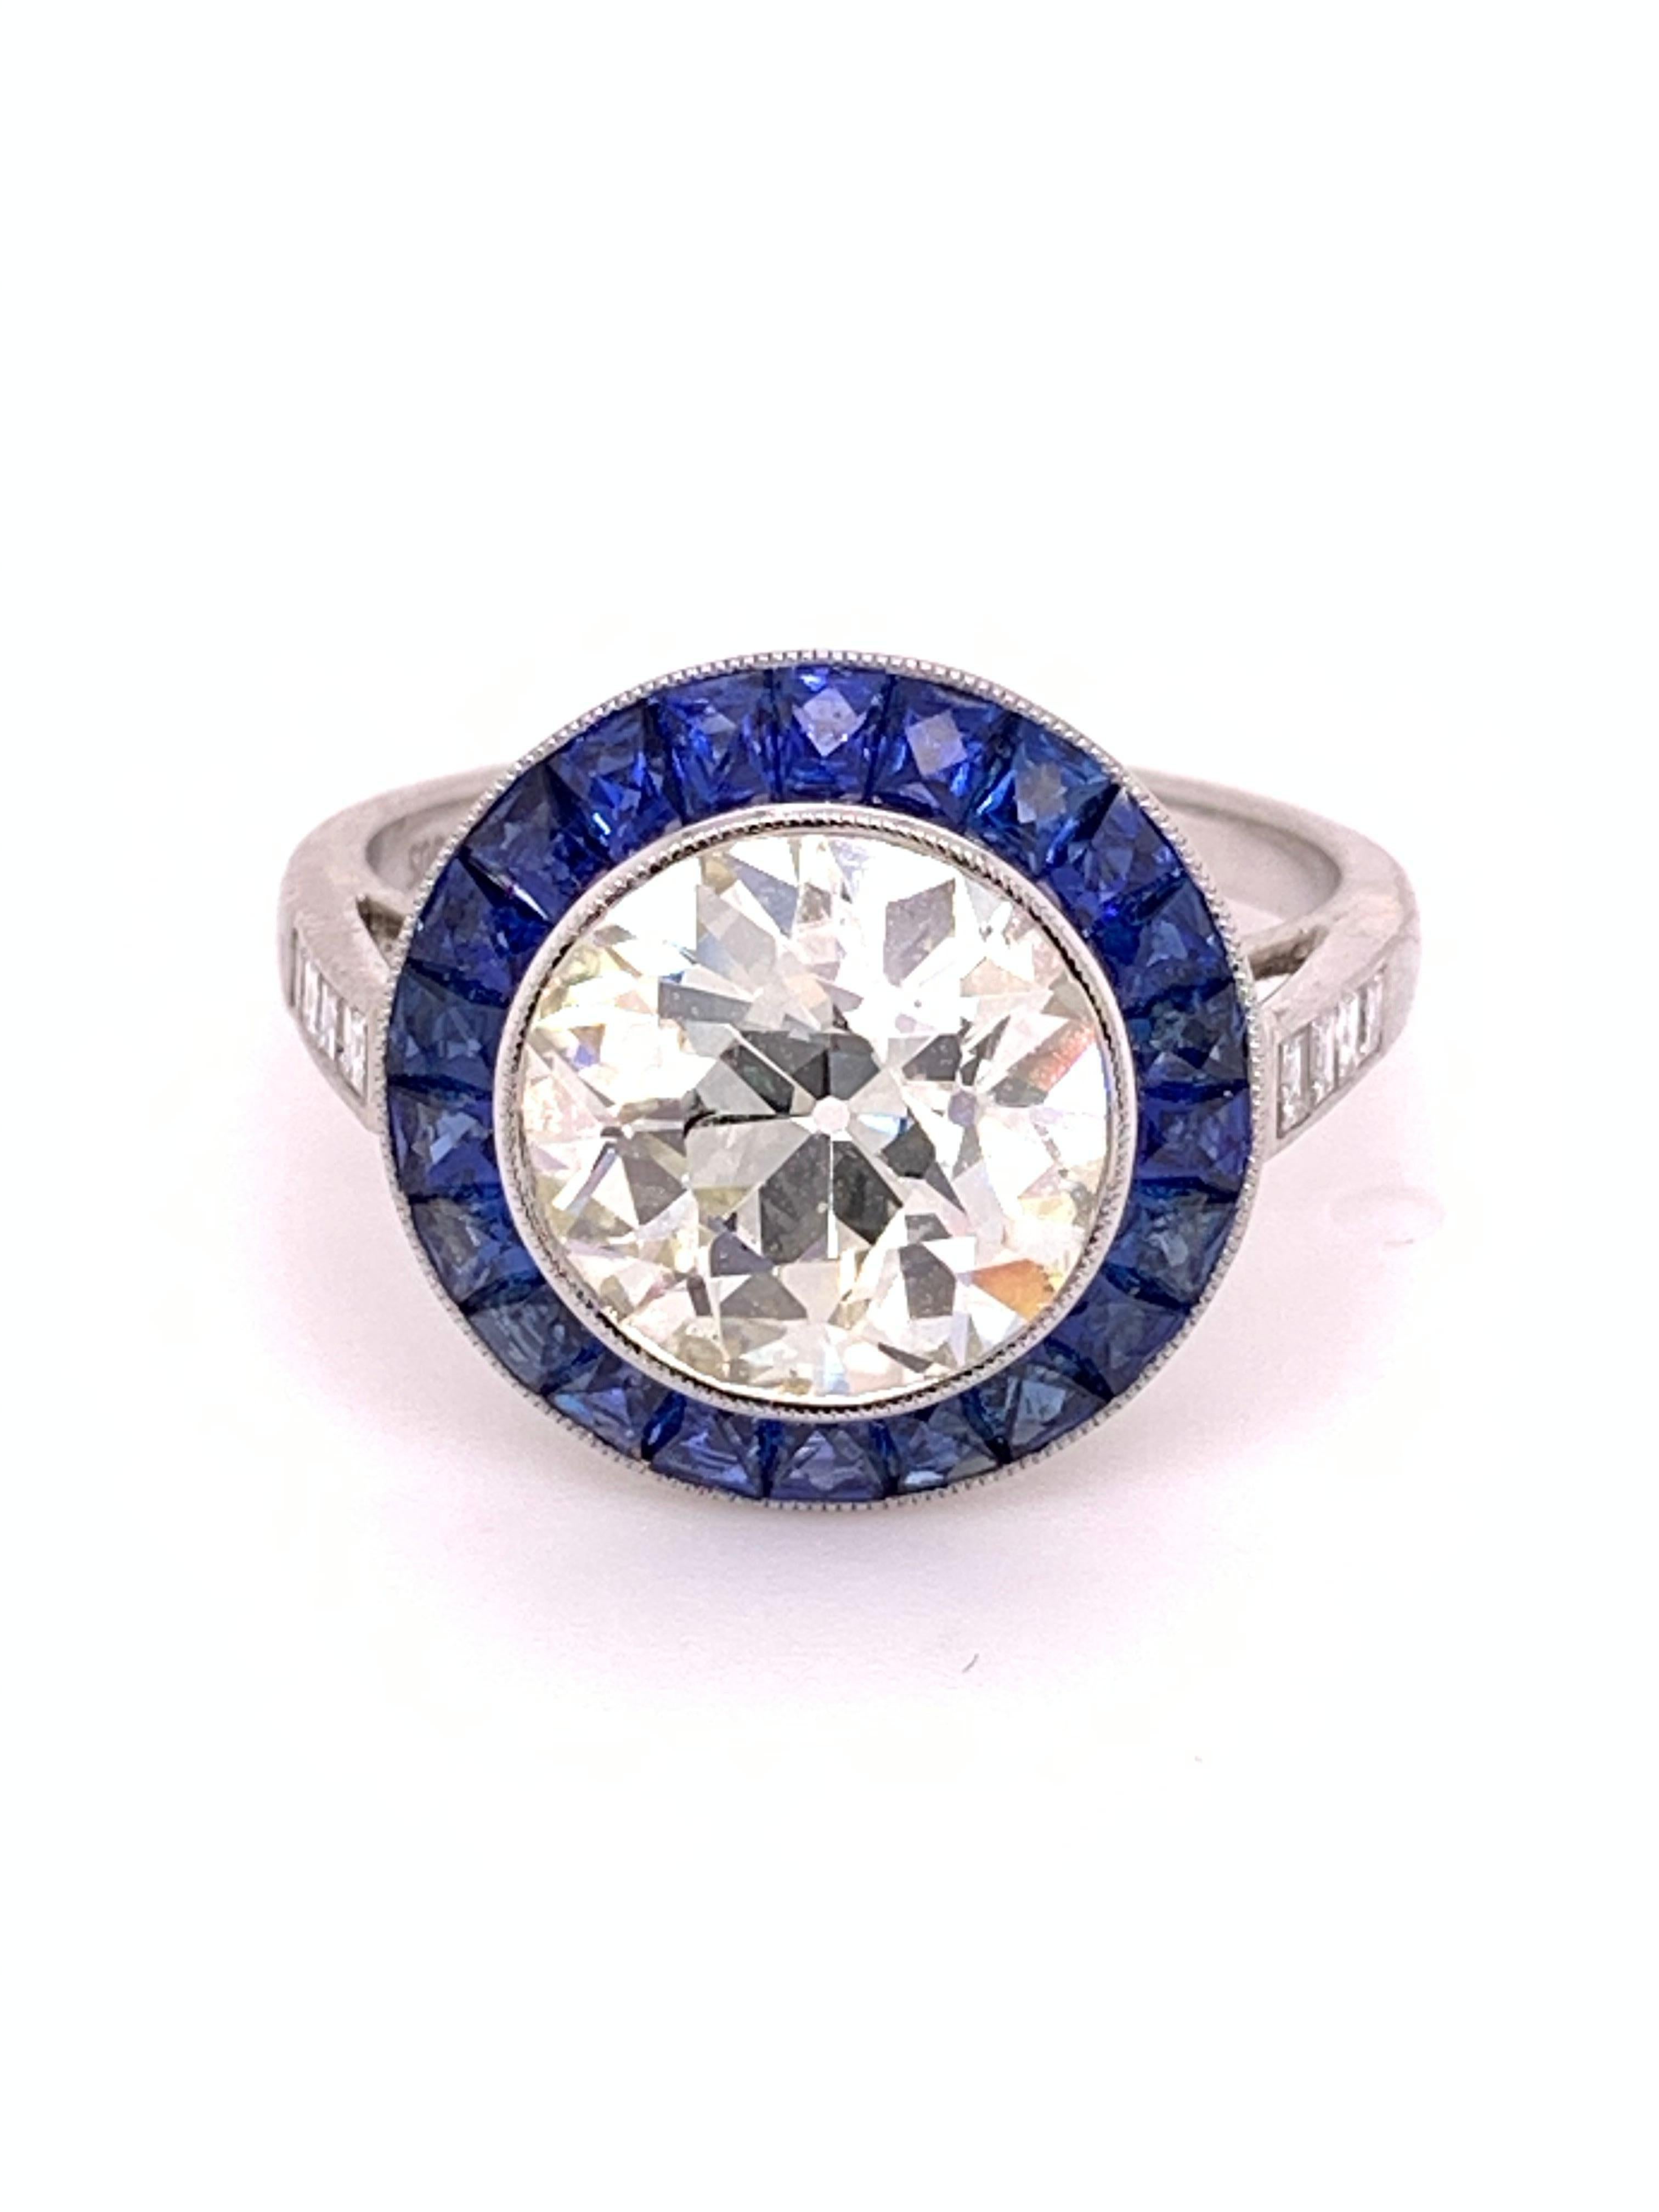 Sophia D GIA Certified 3.04 Carat Diamond Center and Blue Sapphire Platinum Ring In New Condition For Sale In New York, NY